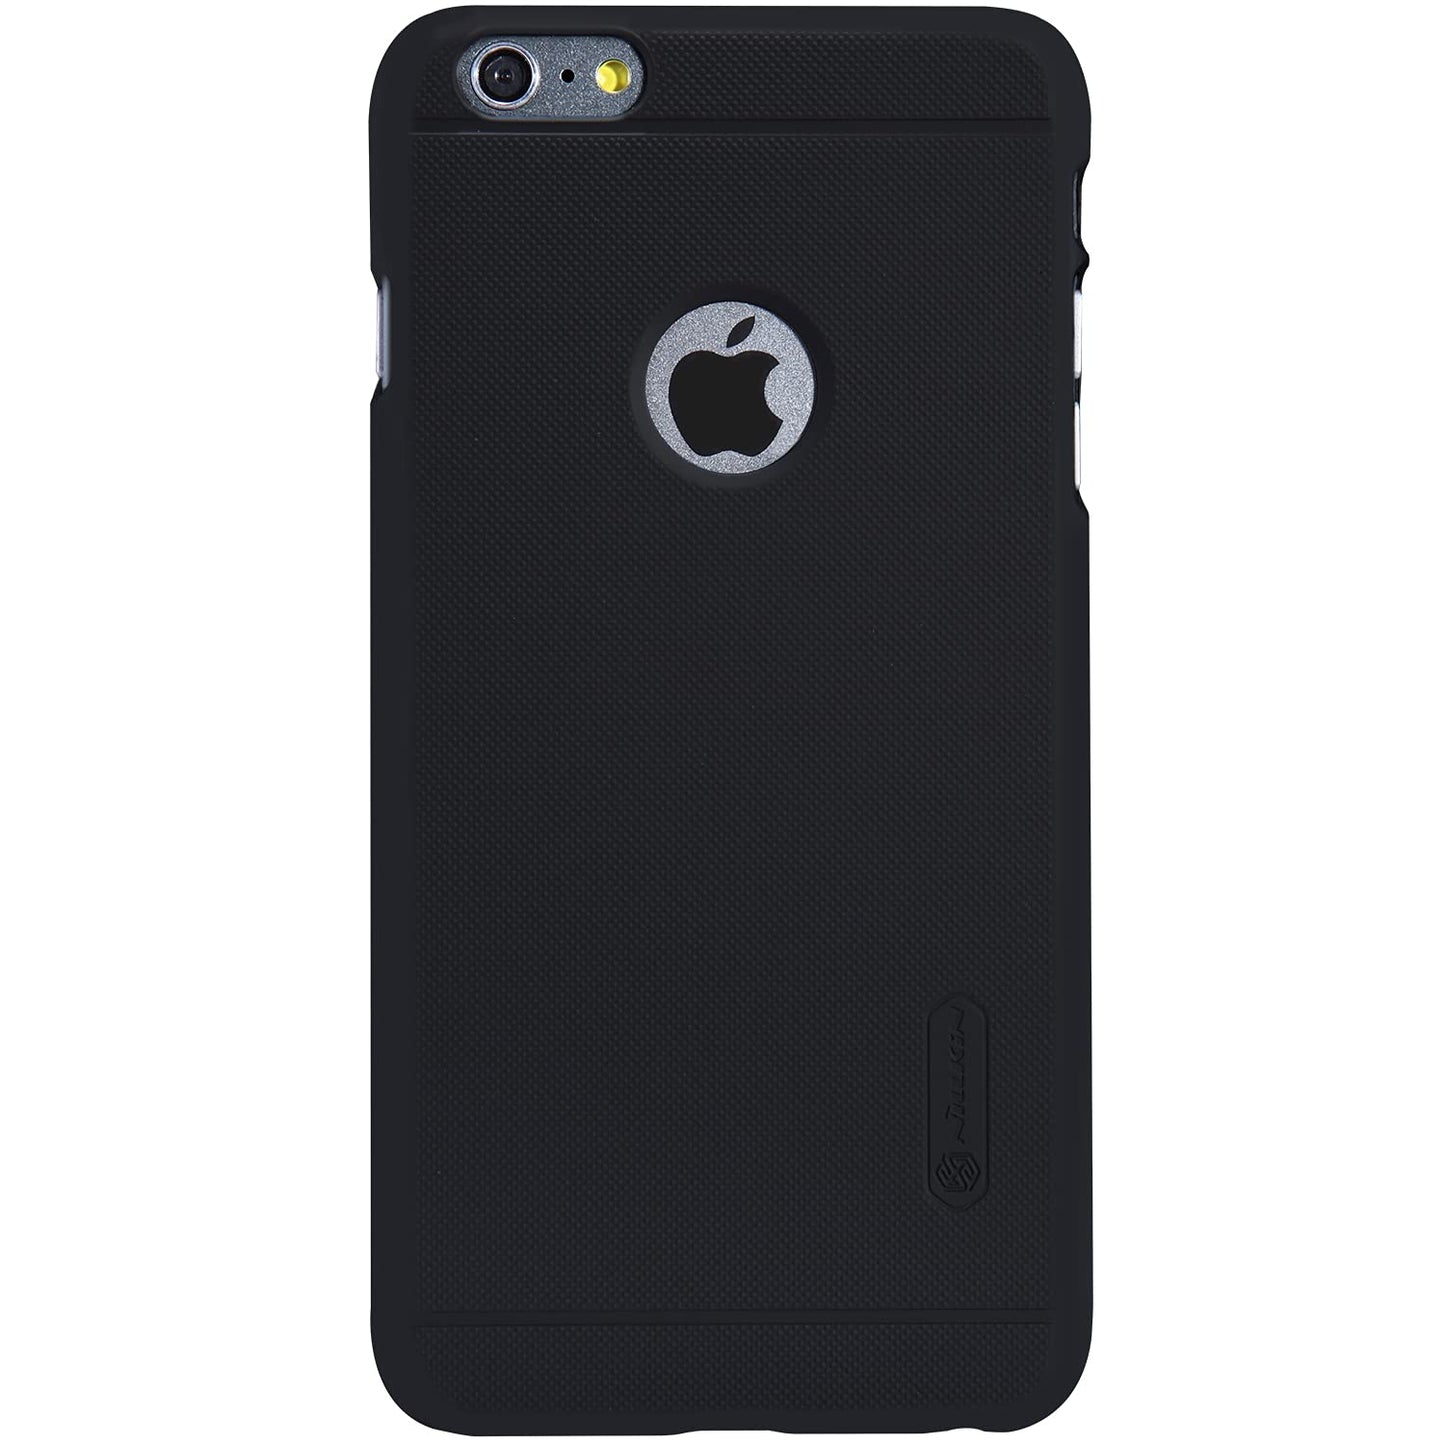 Nillkin Case for Apple iPhone 6 / iPhone 6S (4.7 inch) Super Frosted Hard Back Cover PC with Logo Cut Black Color (TPU)